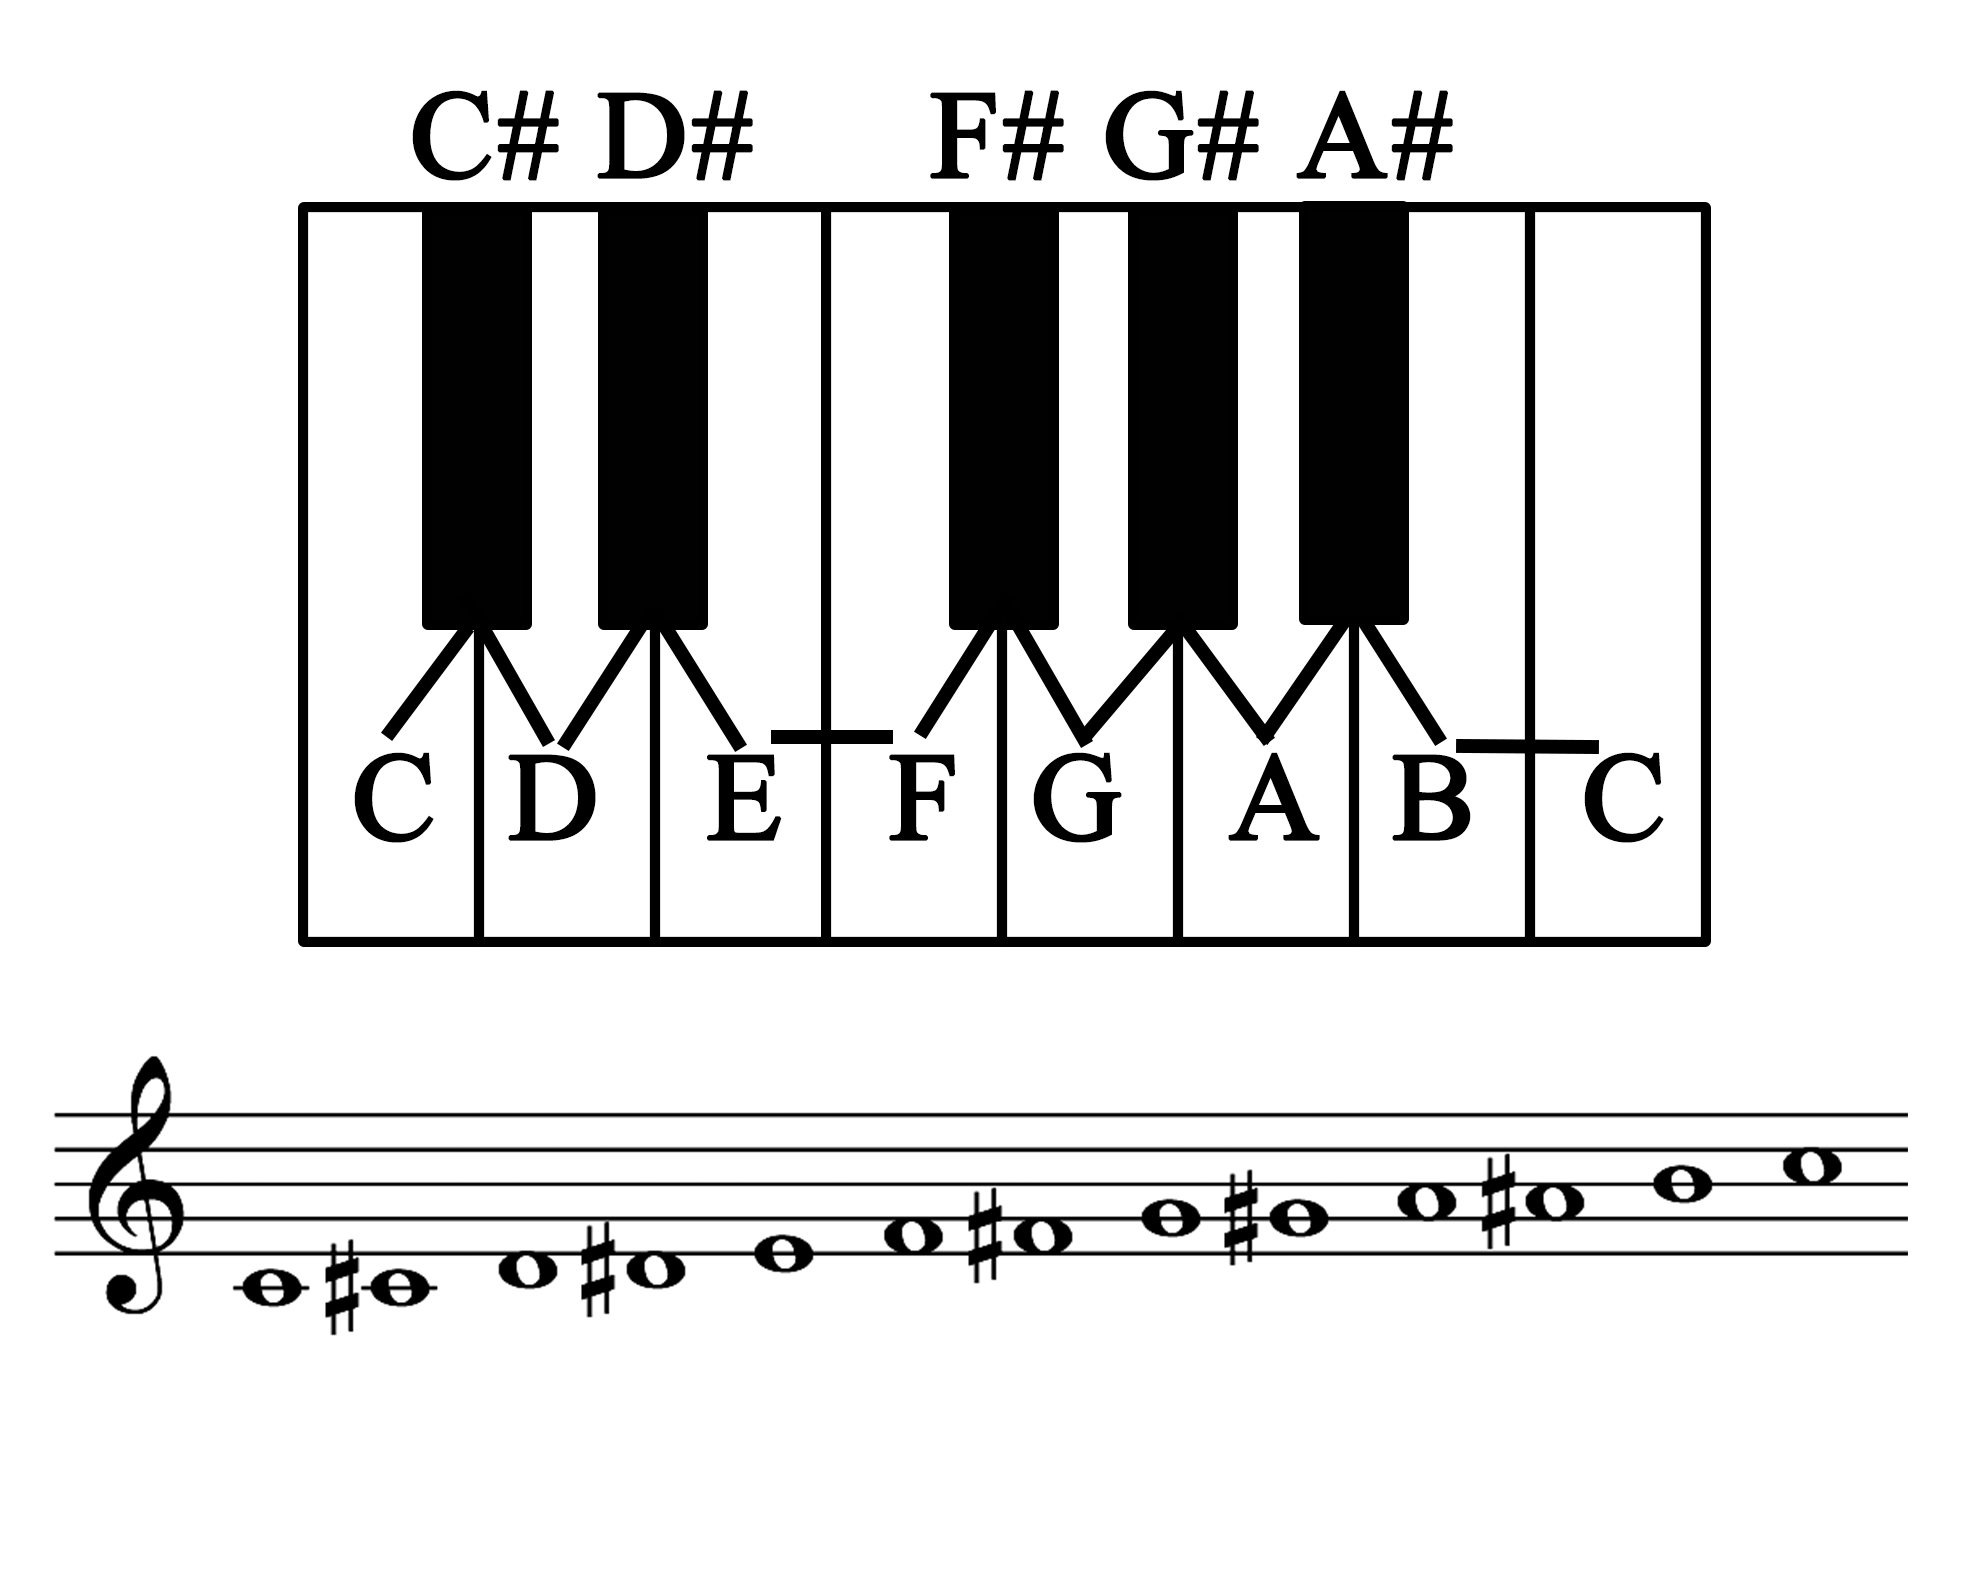 A keyboard with chromatic scale C, C-sharp, D, D-sharp, E, F, F-sharp, G, G-sharp, A, A-sharp, B, C labeled and shown on a staff.